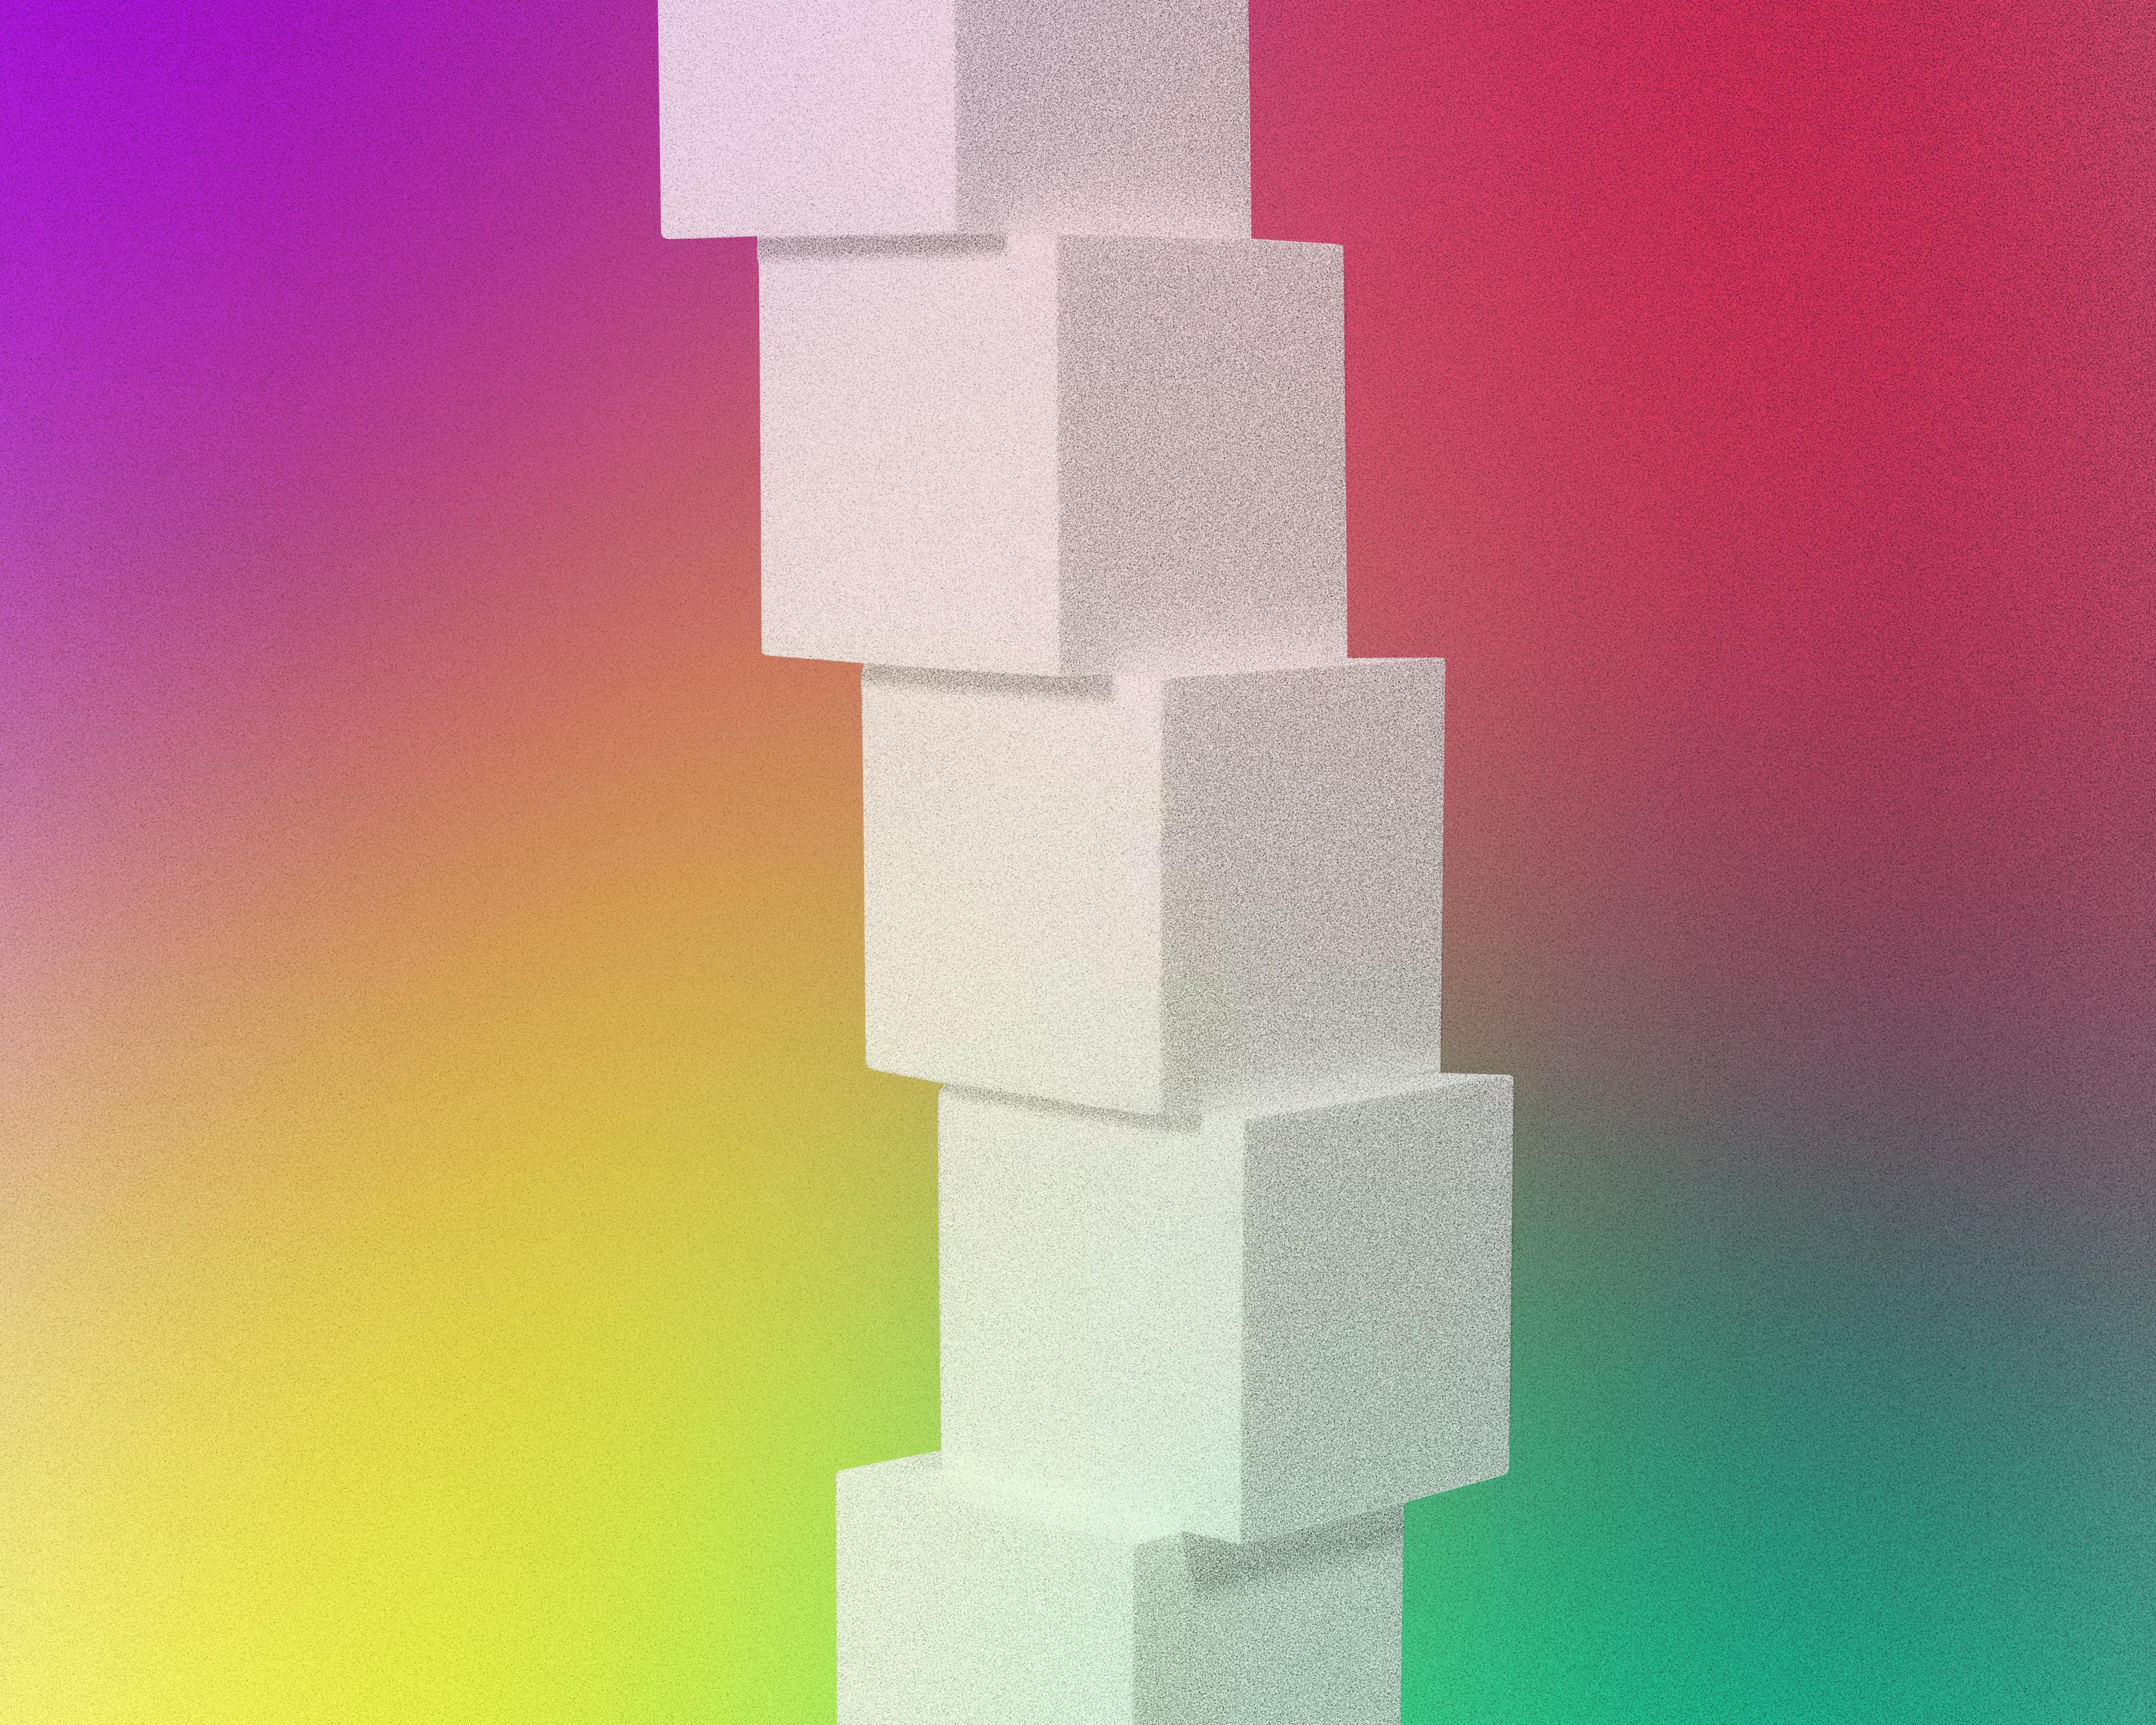 Close-up of Architectonic I, a colorful digital c-print with white cubes by artist Adam Ryder.